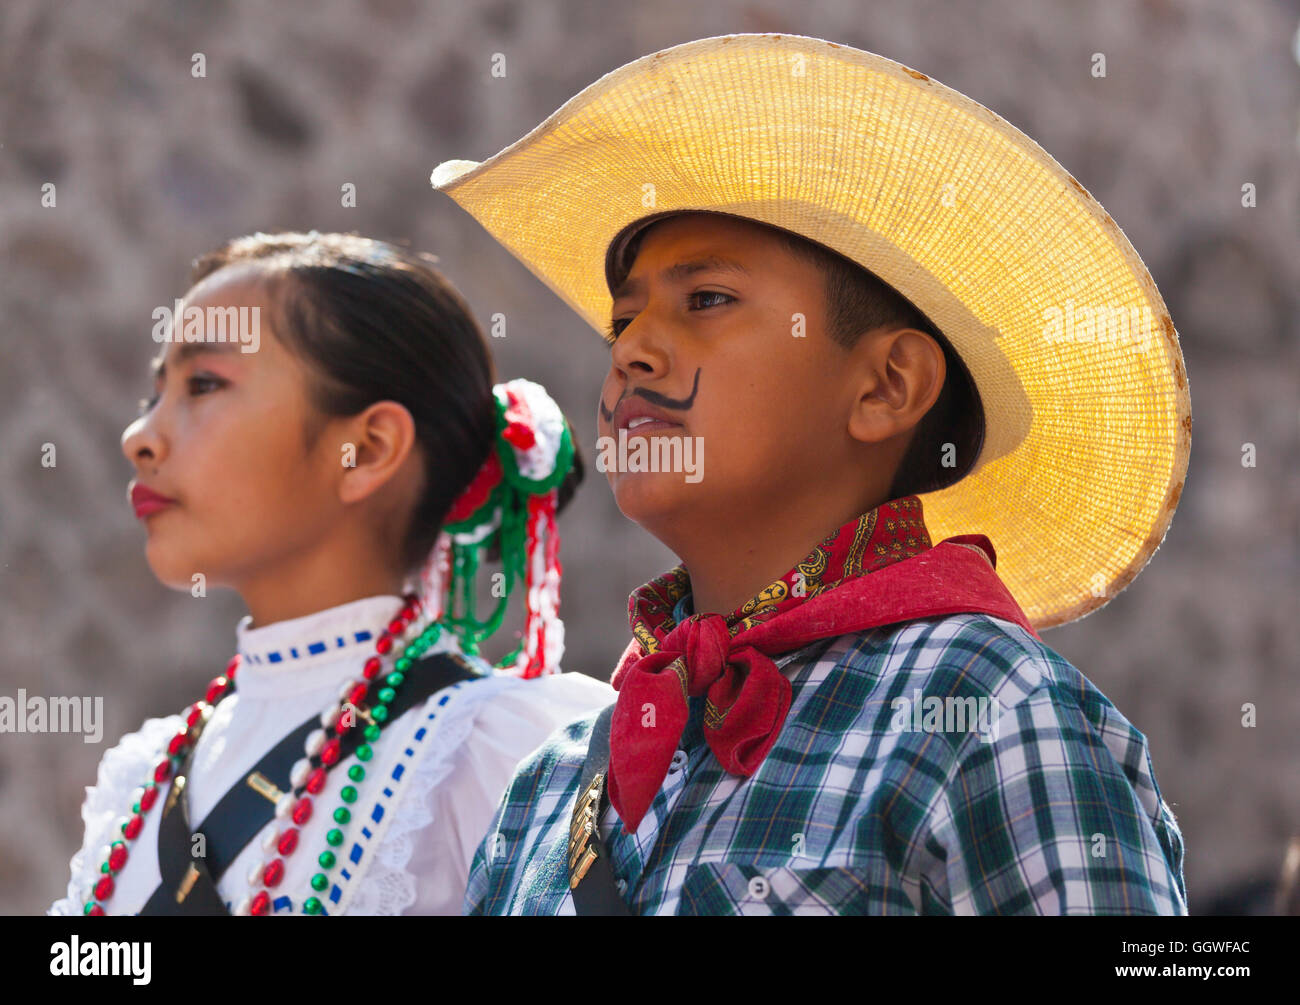 DAY OF THE REVOLUTION is celebrated with a parade on November 20th each year - SAN MIGUEL DE ALLENDE, MEXICO Stock Photo